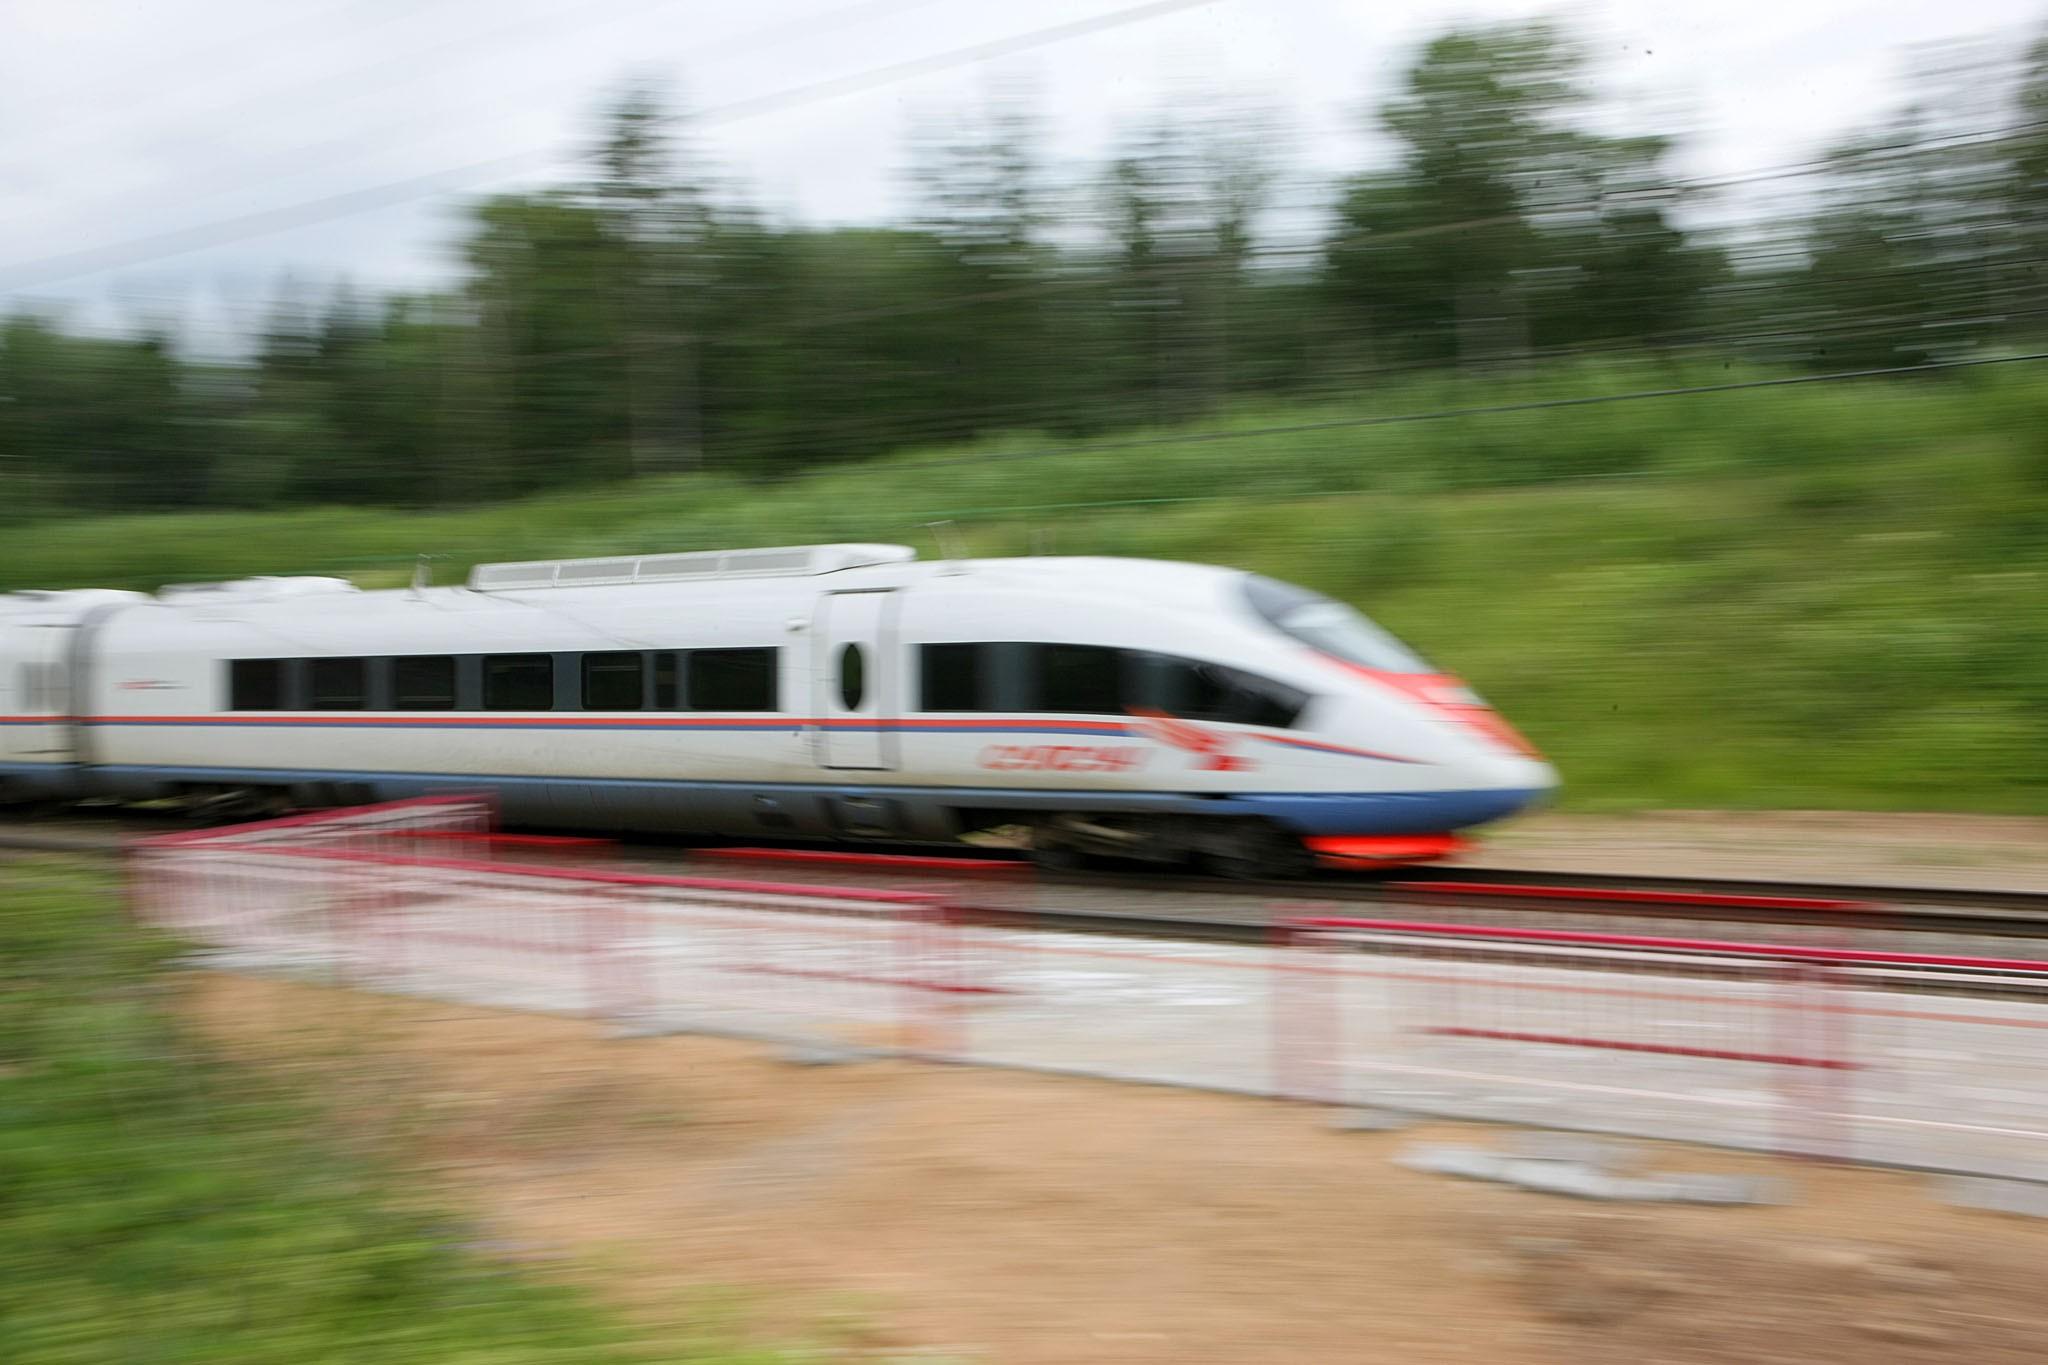 Sapsan Train, high speed connection between Moscow and St. Petersburg